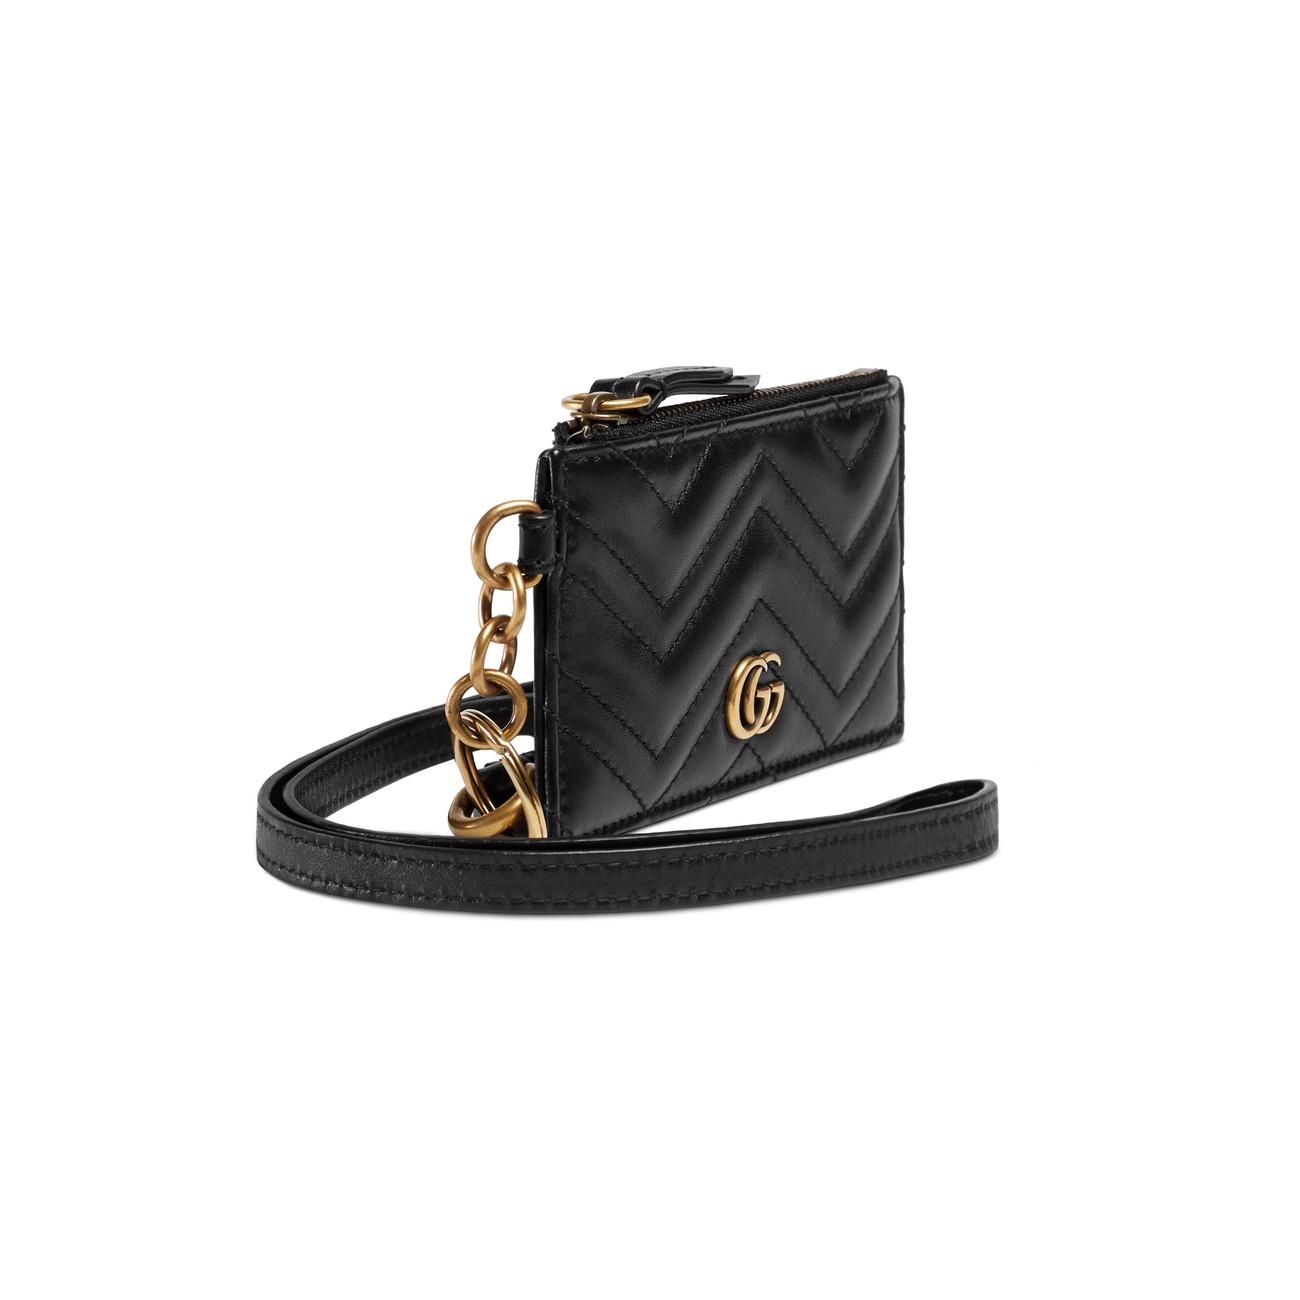 Gucci GG Marmont Card Case in Black - Lyst